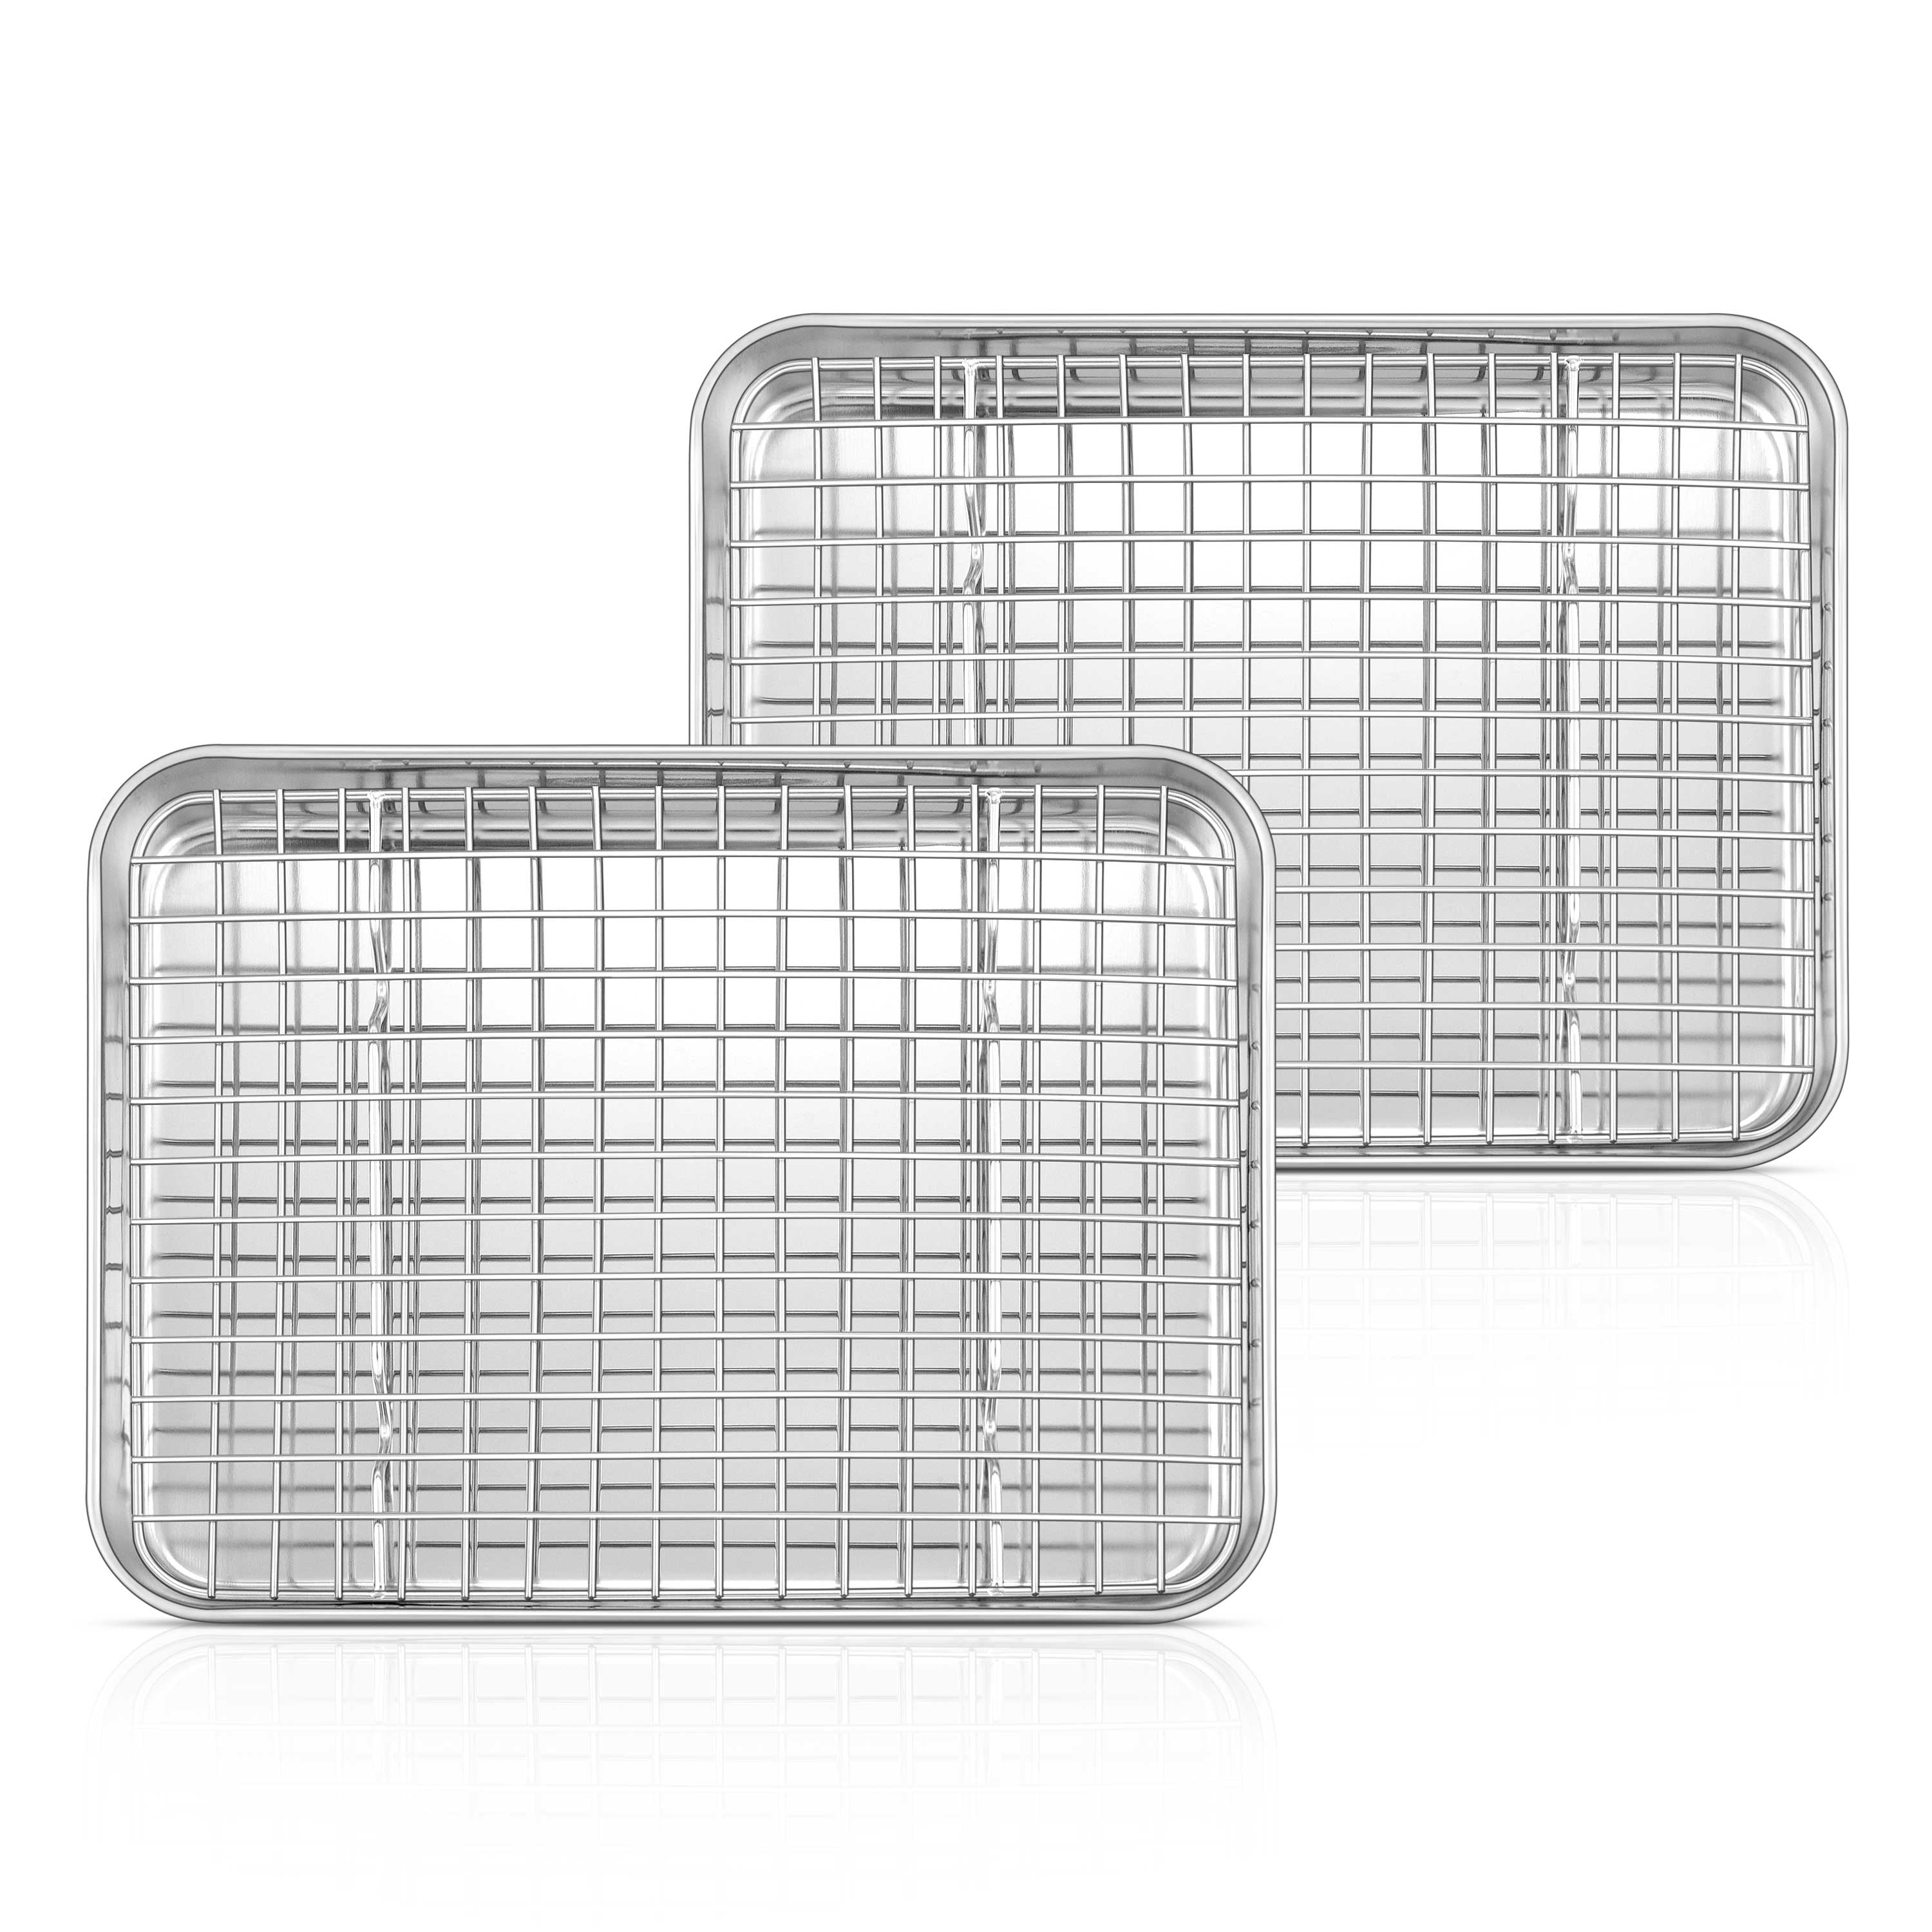 WEZVIX Stainless Steel Baking Sheet with Cooling Rack Set of 2 Cookie Sheet  with Wire Rack Rectangle Size 10 x 8 x 1 inch, Non Toxic, Rust Free & Less